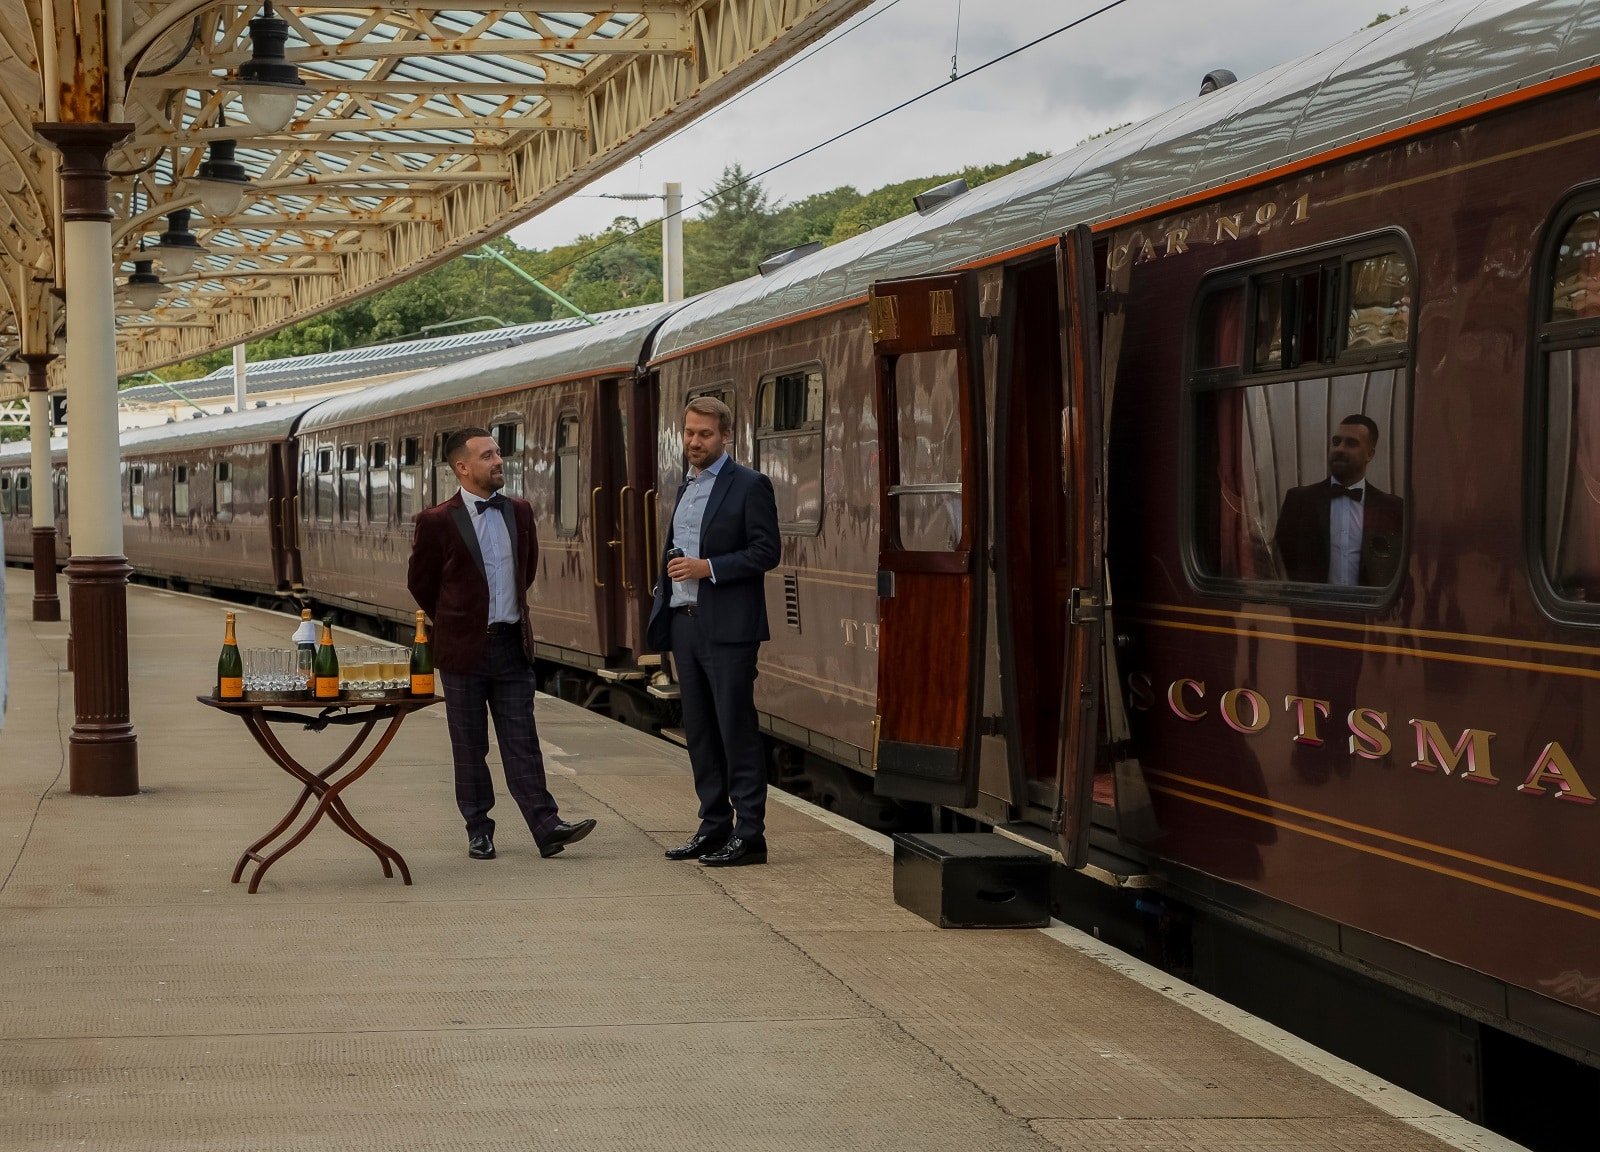 <p><span>Journey through the heart of the Scottish Highlands on the Belmond Royal Scotsman. This luxury train offers a unique way to explore Scotland’s castles, lochs, and glens, with traditional Scottish entertainment, fine dining, and observation cars for scenic viewing.</span></p> <p><b>Insider’s Tip: </b><span>Join one of their classic whisky tours for a taste of Scotland’s finest distilleries.</span></p> <p><b>Best Time to Go: </b><span>April to October for the best weather and full bloom of the Scottish countryside.</span></p> <p><b>Highlight of the Journey: </b><span>The journey through the Cairngorms National Park, offering stunning landscapes and the chance to spot Scottish wildlife.</span></p>